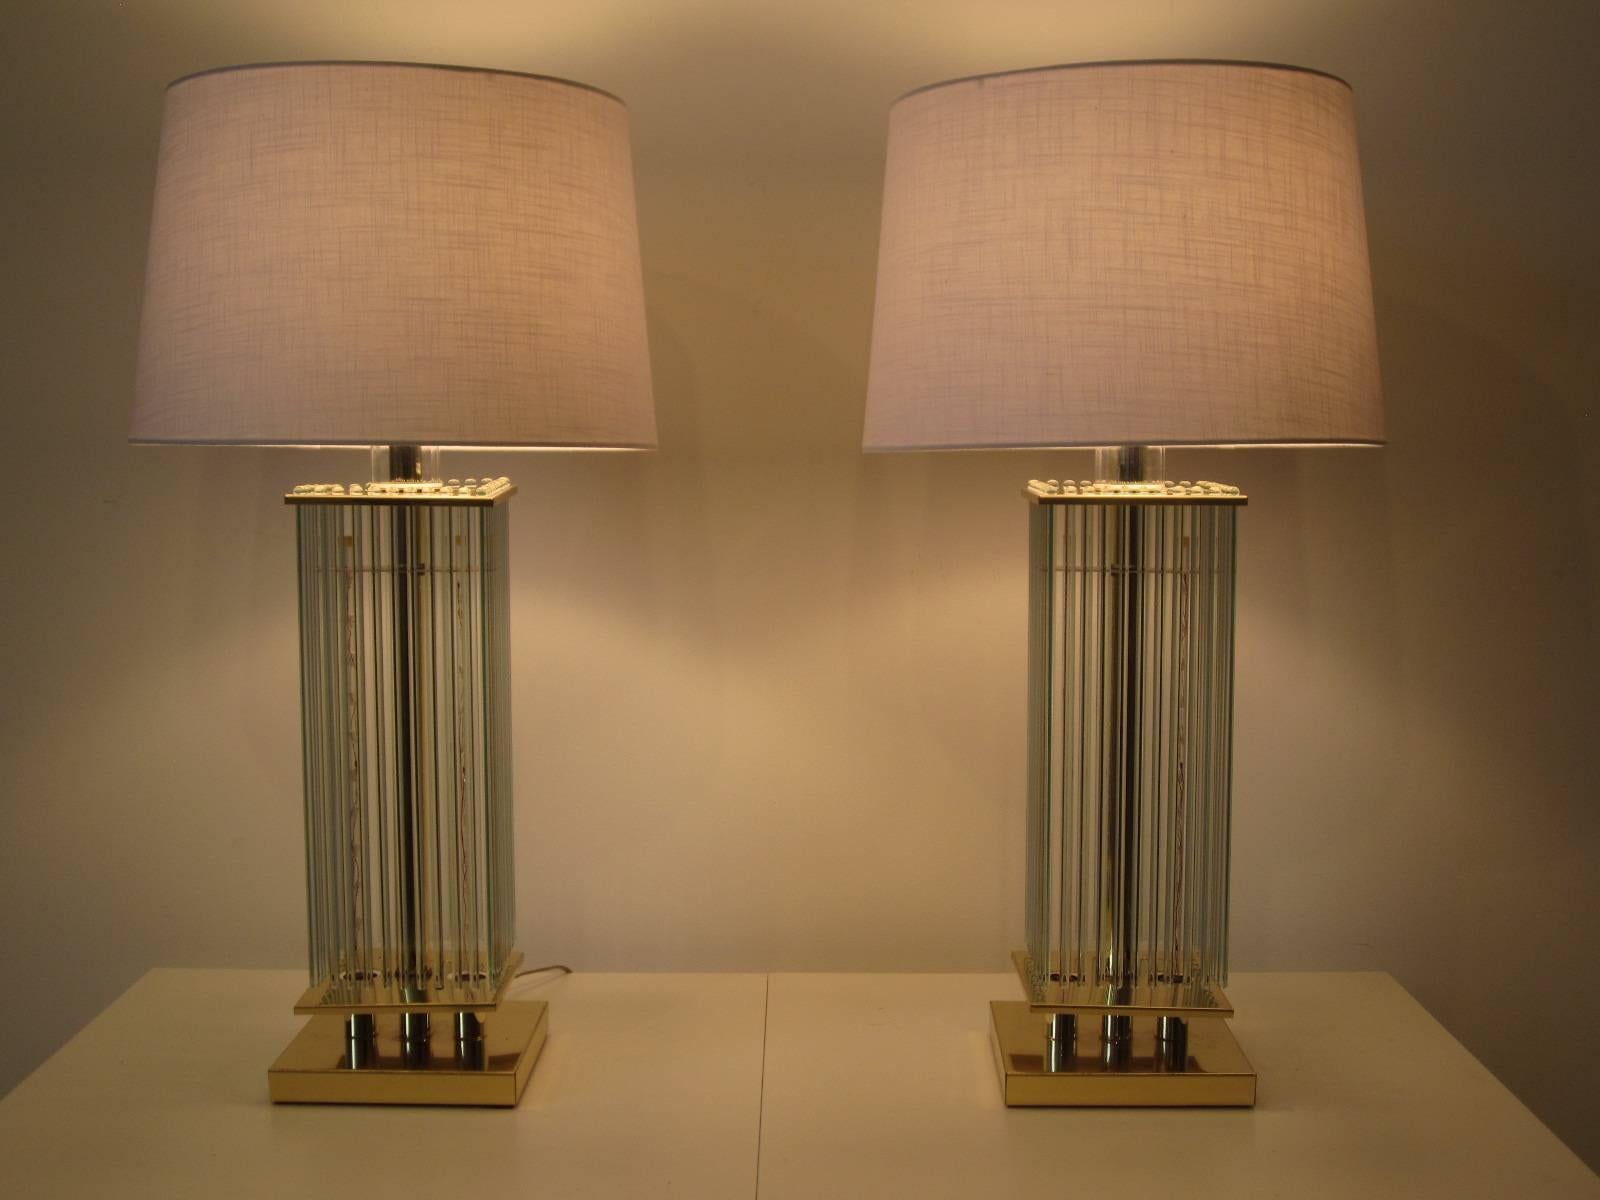 A pair of Scioari brass and hanging glass rod table lamps with a total of 40 polished rods topped with a white linen shade. The lamps have a three way switch, one for a nightlight twinkle affect inside the rods, one turns on the main light and one